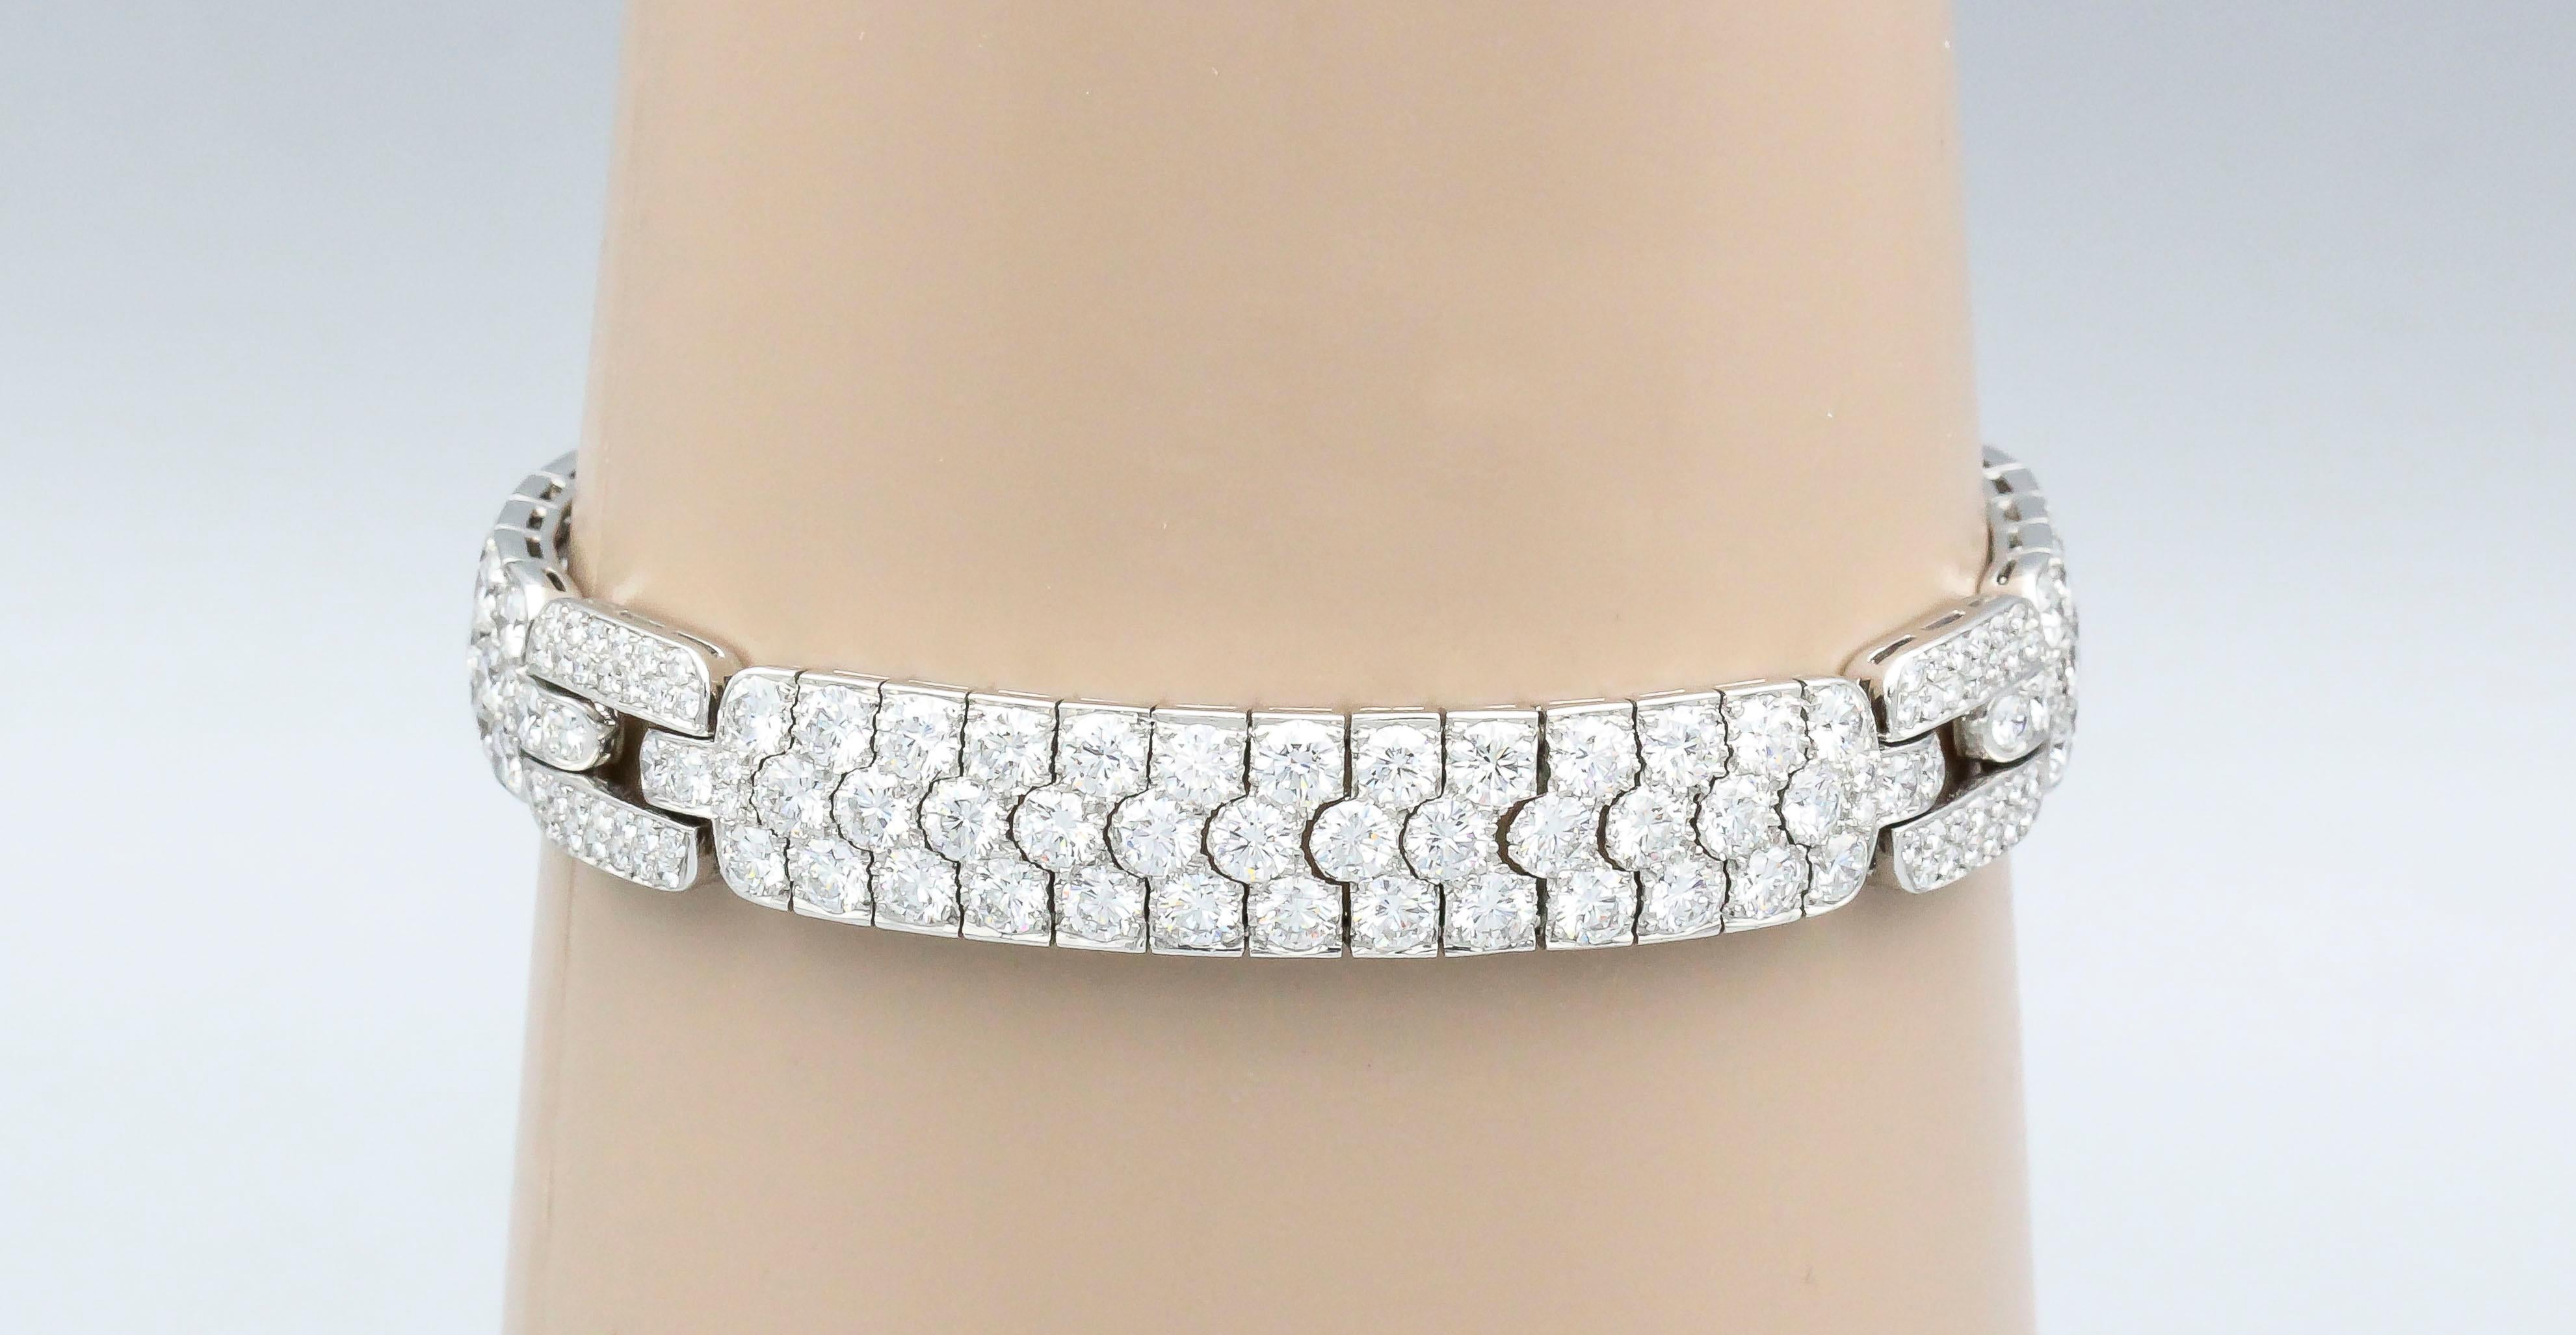 Elegant diamond and platinum bracelet by Tiffany & Co. This beautifully made bracelet features very high grade round brilliant cut diamonds, approx. 18.0-20.0cts total weight. 

Hallmarks: Tiffany & Co., PT950